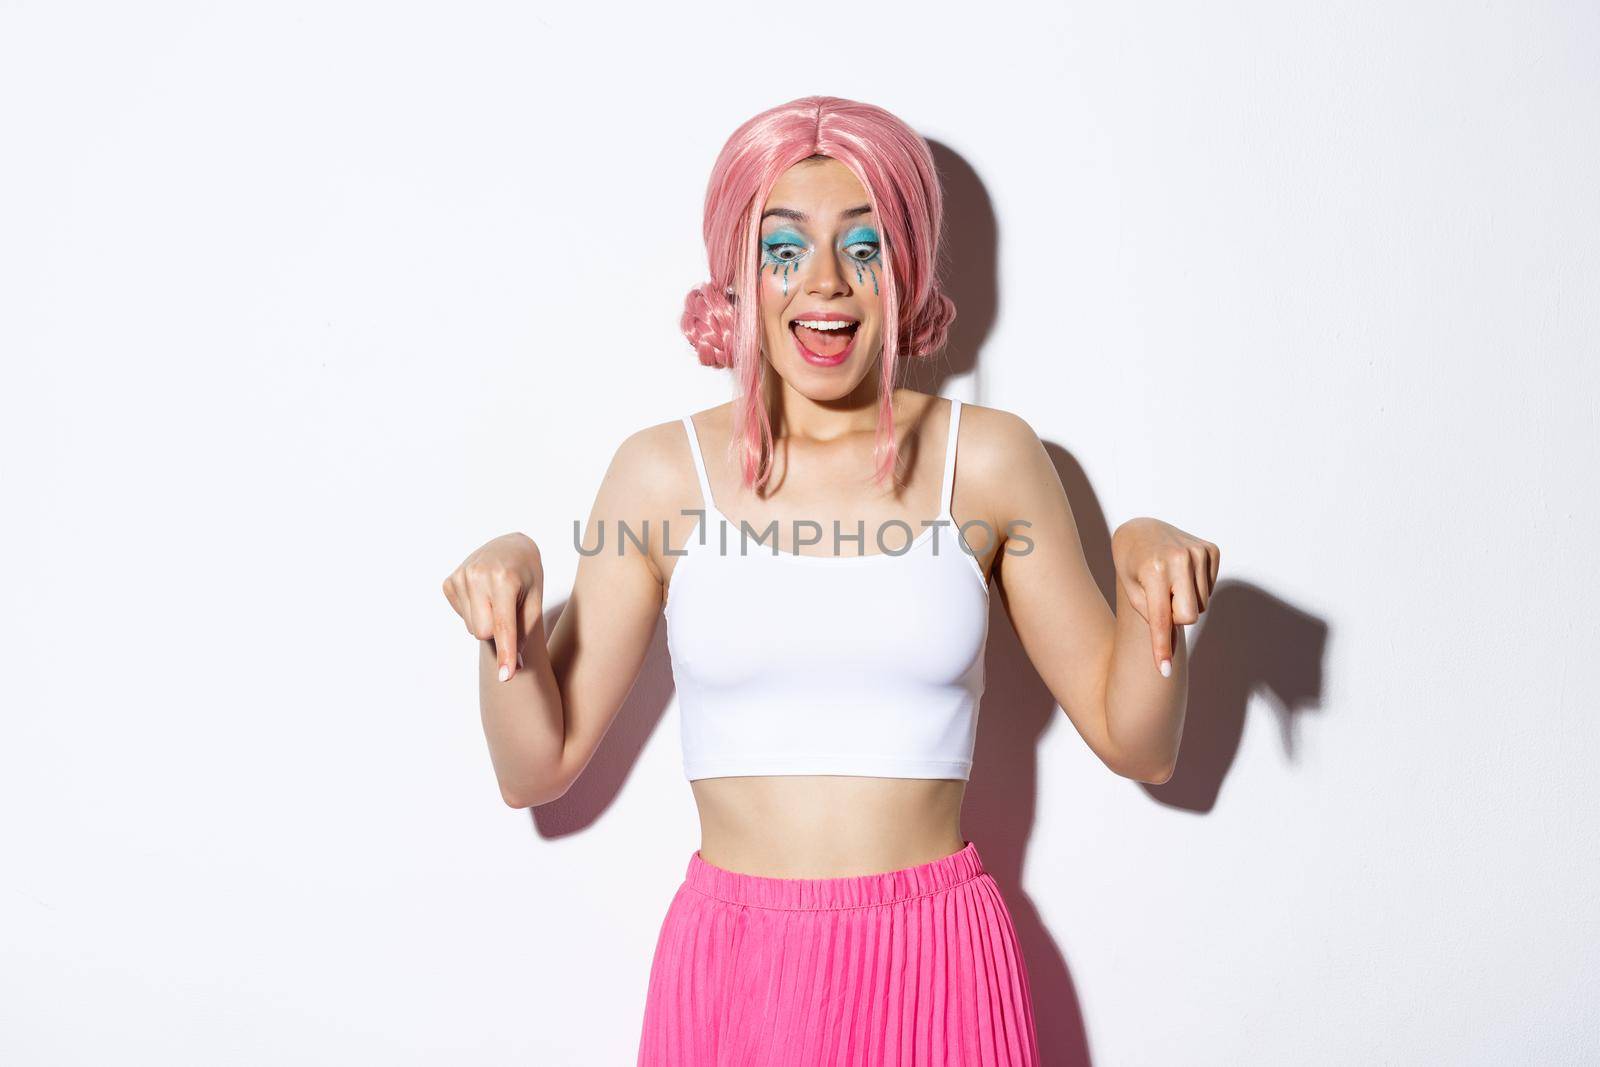 Portrait of excited party girl in pink wig and bright makeup, react to something amazing, pointing fingers down and gasping fascinated, standing over white background.